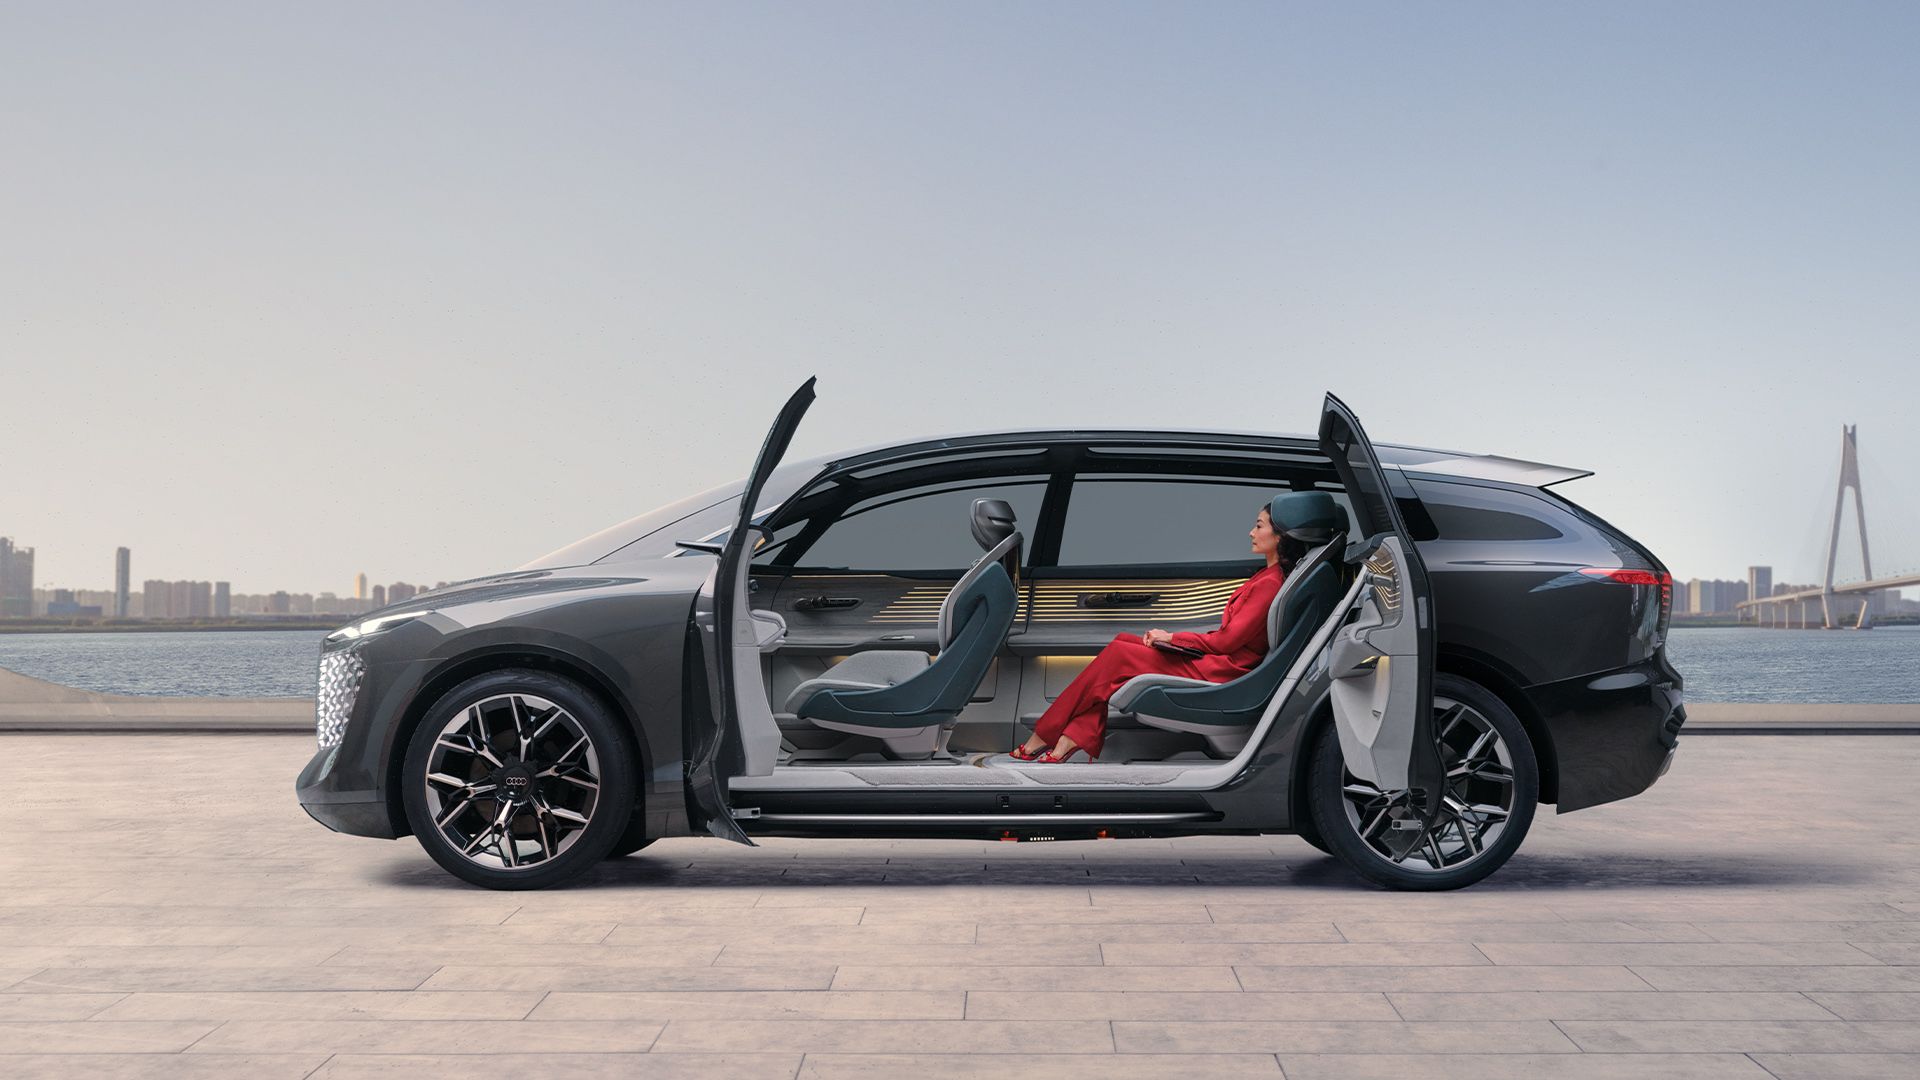 The open doors reveal the interior of the Audi urbansphere concept.